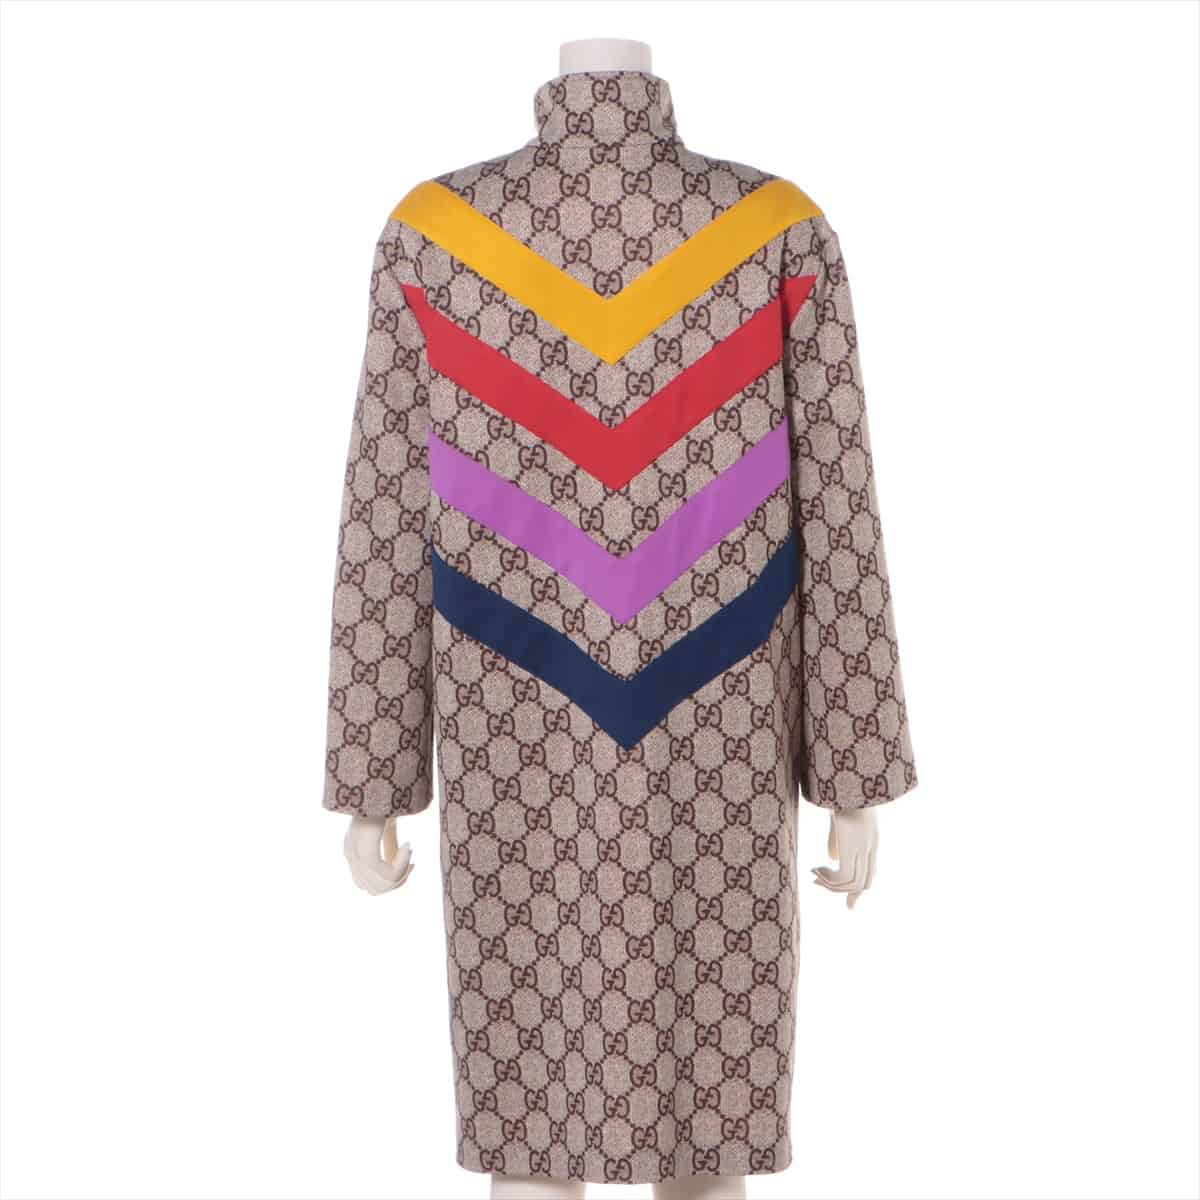 Gucci GG 19-year Cotton & polyester Dress S Ladies' Brown  580583 rainbow print